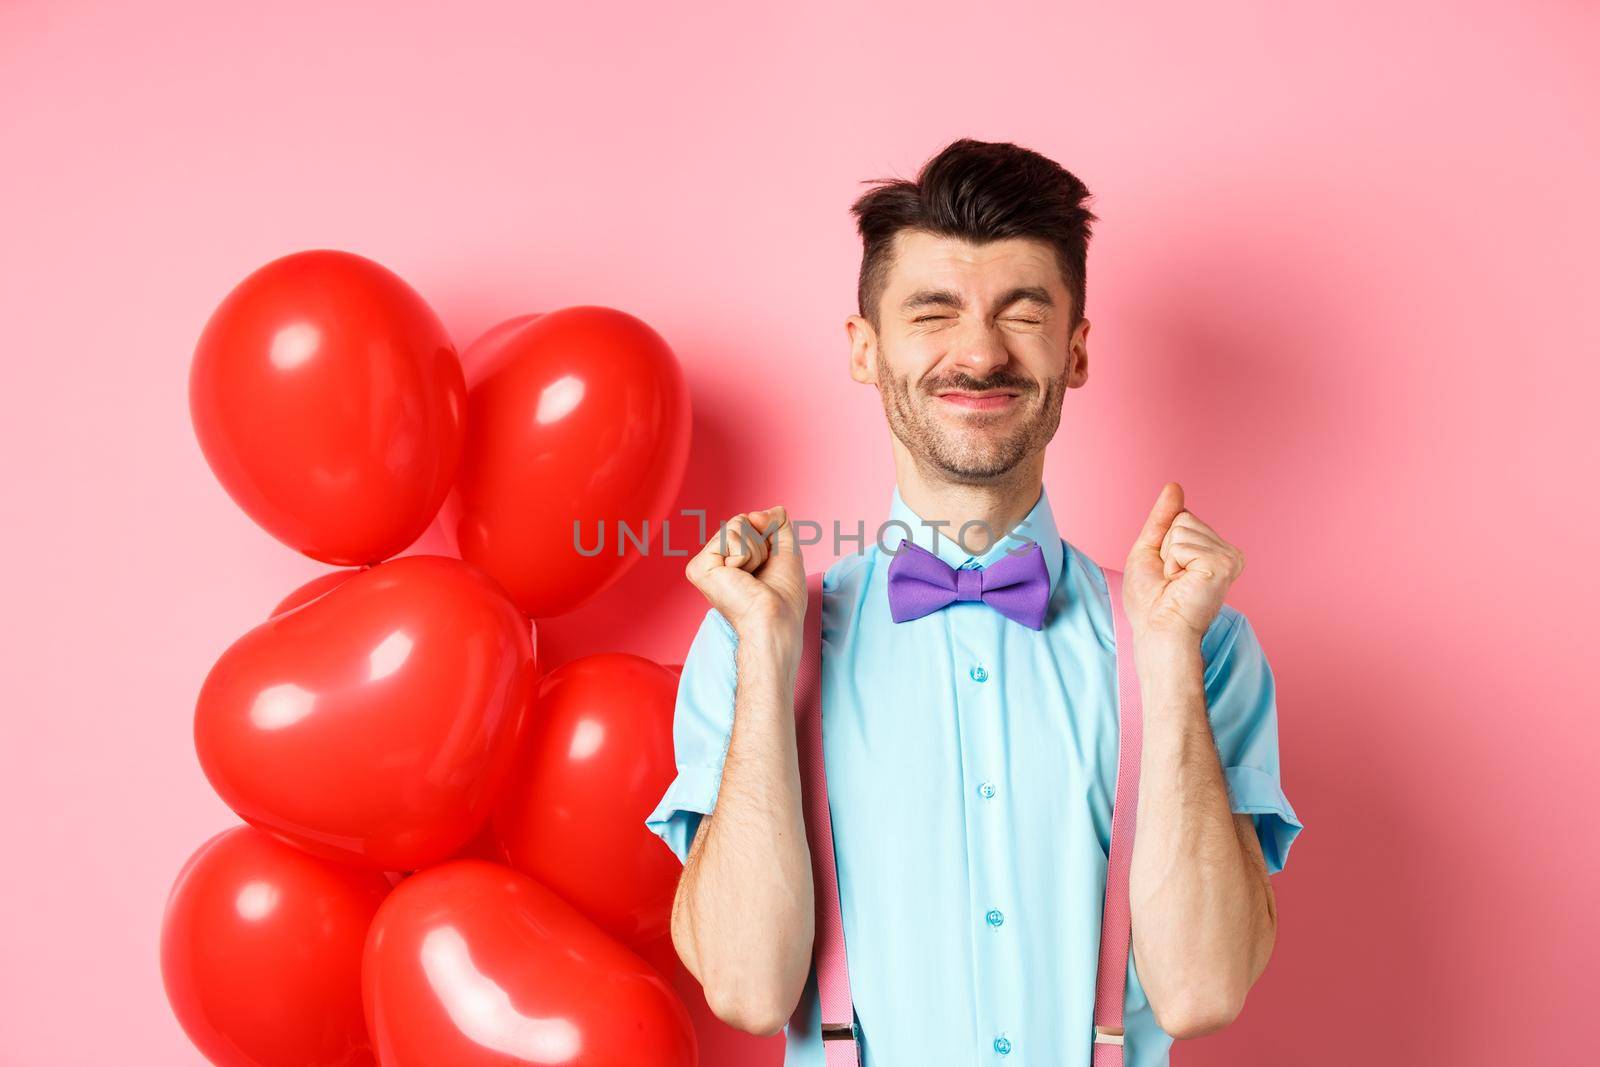 Valentines day concept. Cheerful guy jumping from excitement before romantic date, standing near big red hearts balloons and celebrating, pink background.